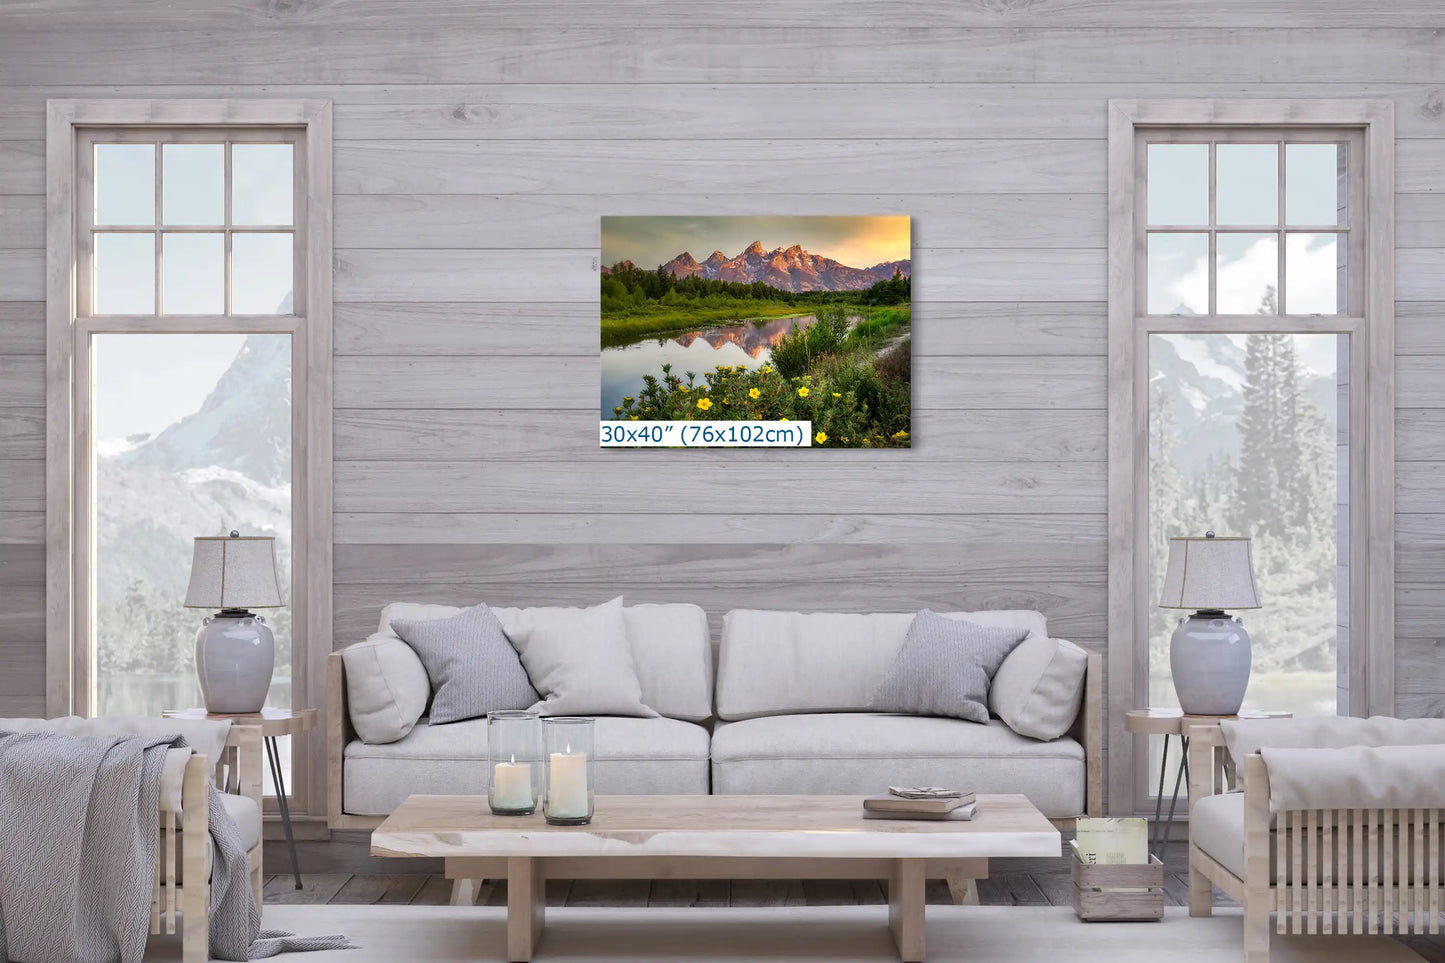 A large 30x40 inch canvas print on a living room wall, showing the Grand Teton Mountains at sunrise with reflective waters and wildflowers.